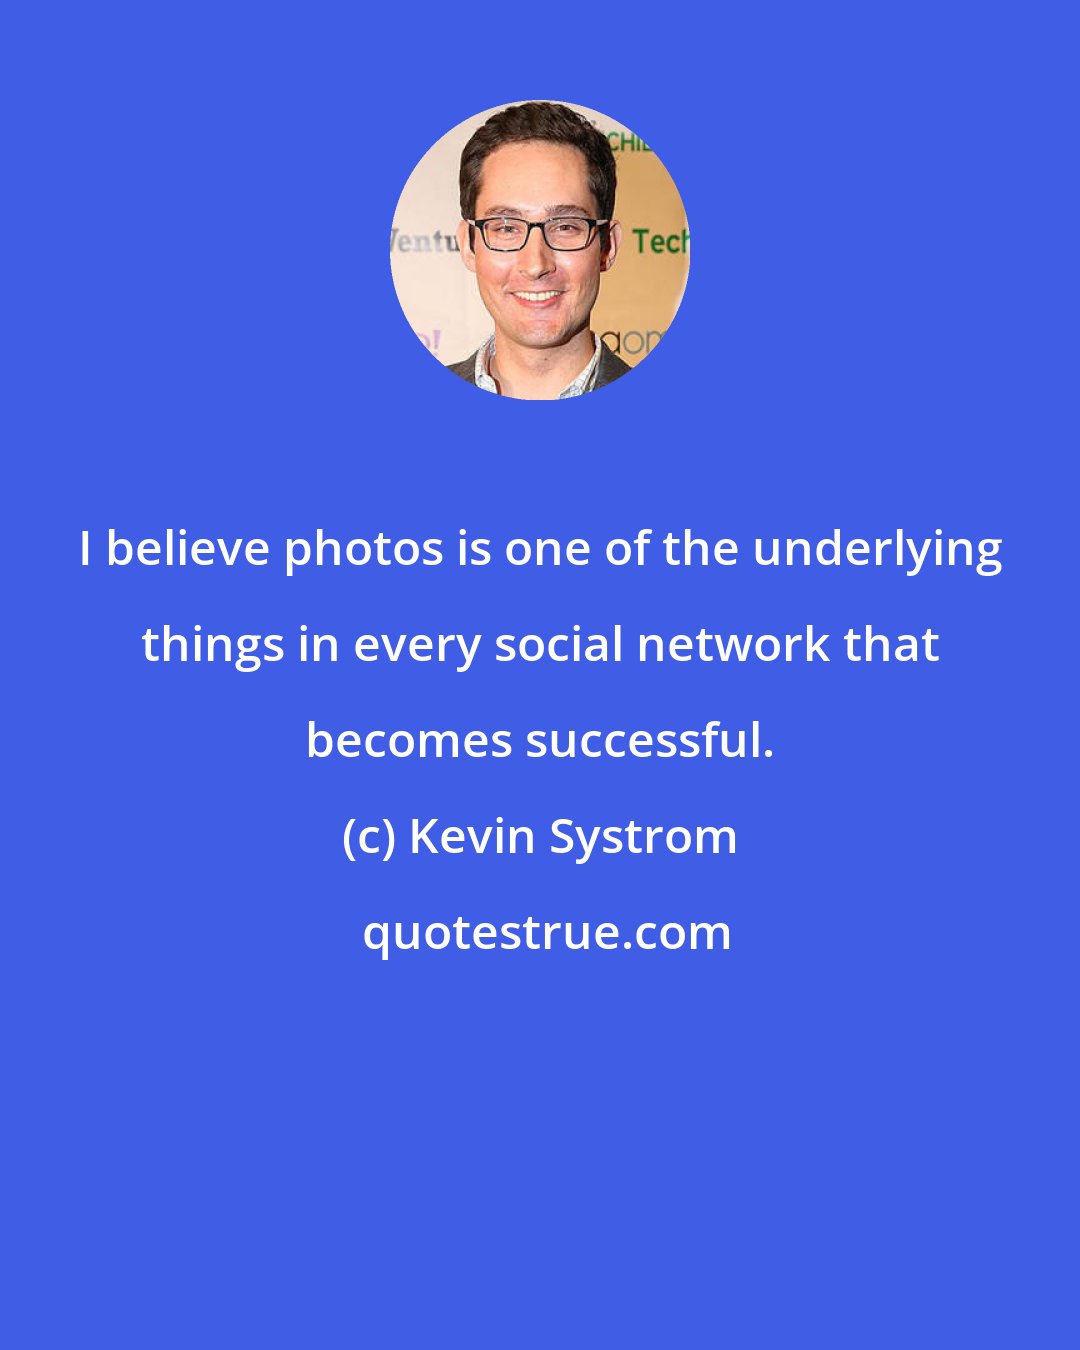 Kevin Systrom: I believe photos is one of the underlying things in every social network that becomes successful.